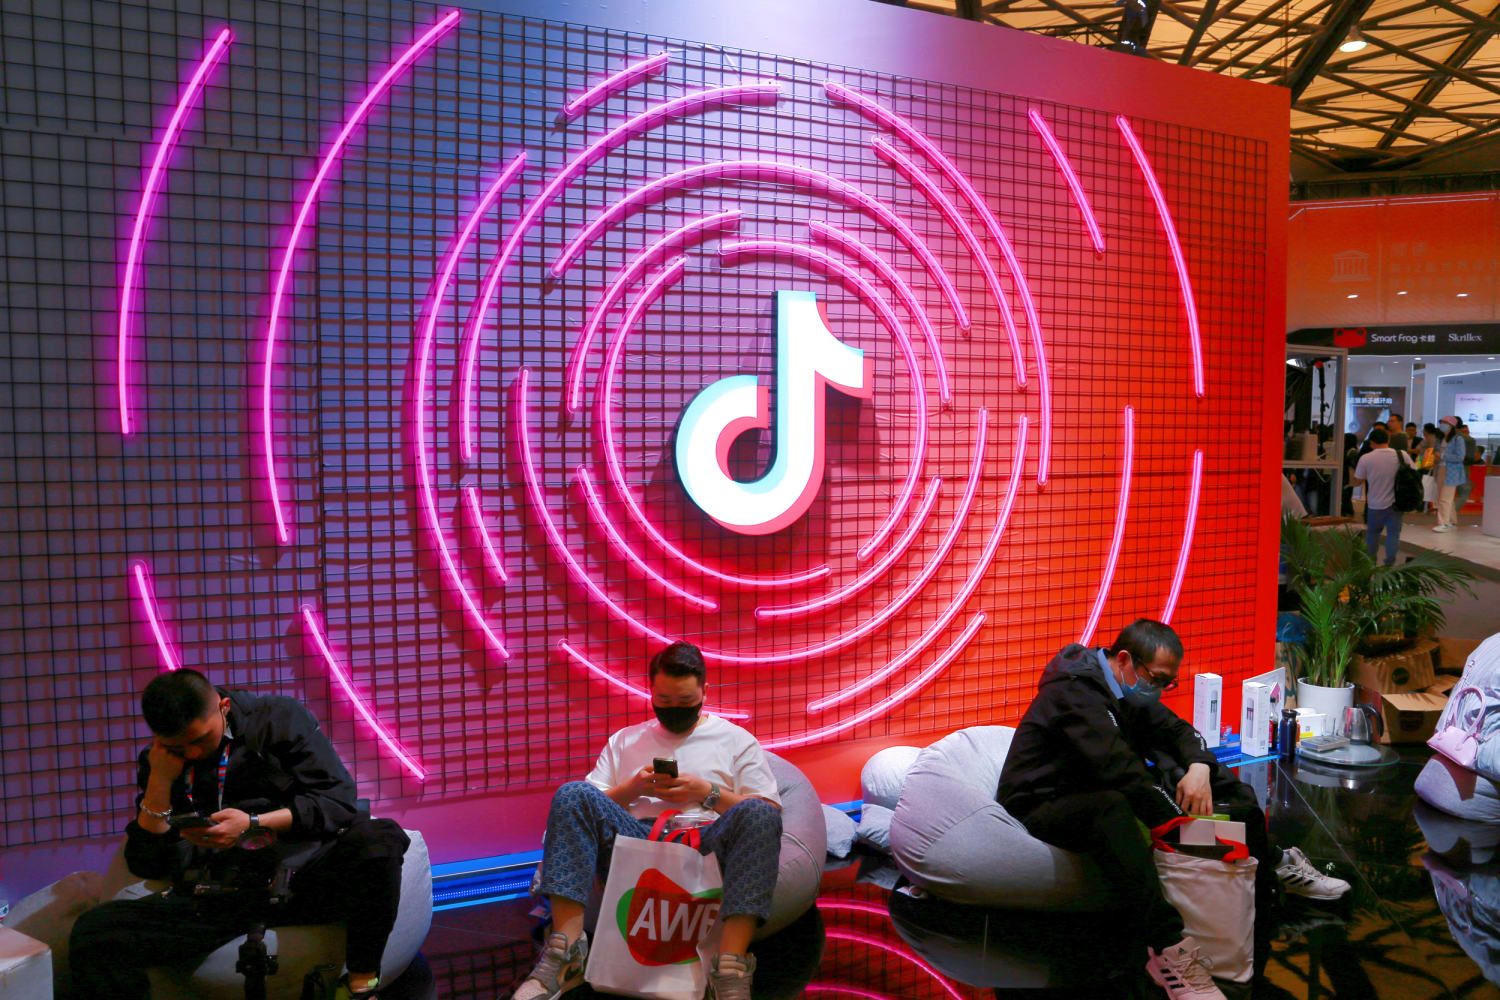 TikTok announces it will establish a youth council in hopes of building a better platform for teens